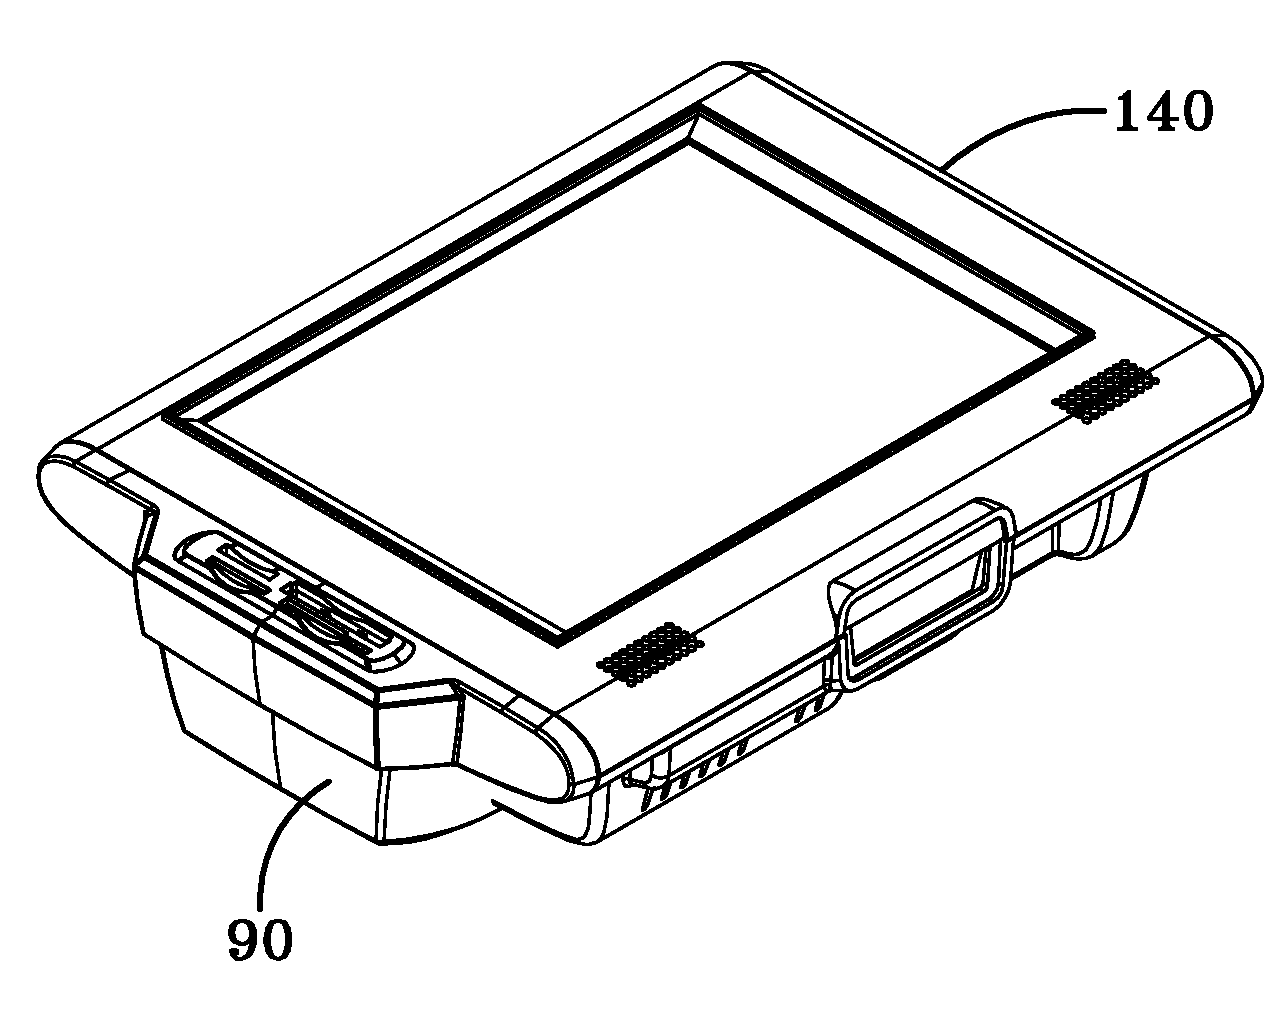 Integrated display computer with telephone switch cradle peripheral